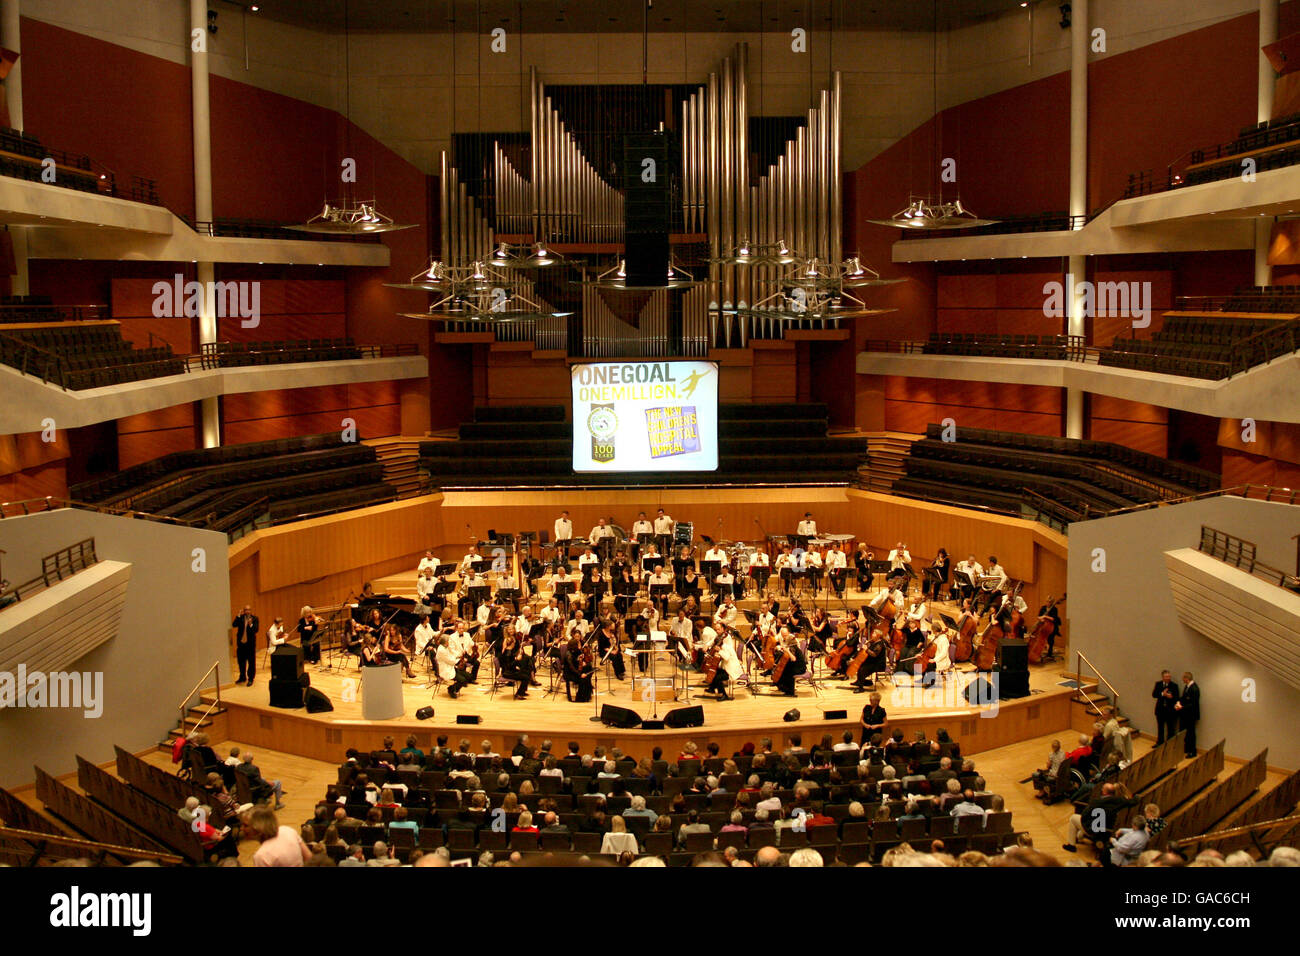 Soccer - PFA Centenary Event - The Halle Orchestra Plays Football - Bridgewater Hall, Manchester Stock Photo